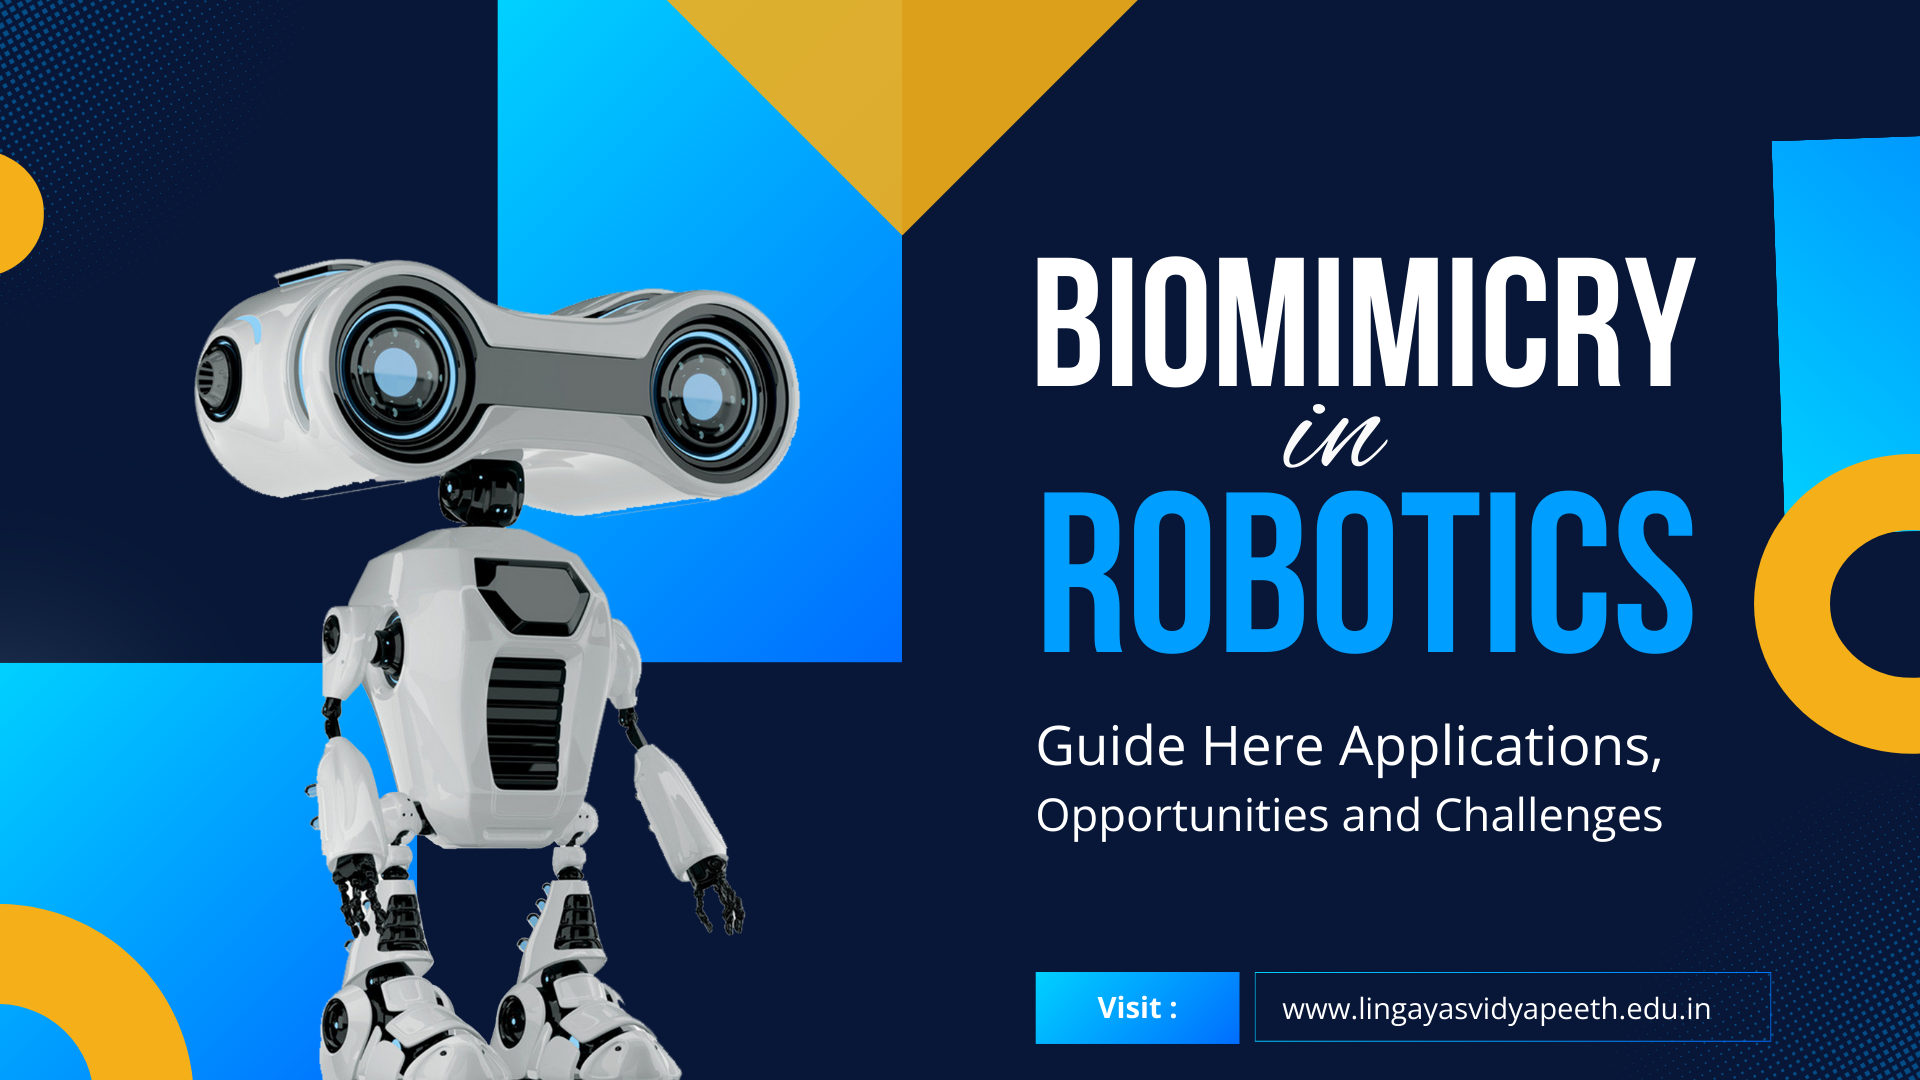 Biomimicry Changes the Future of Robotics – Guide Here!